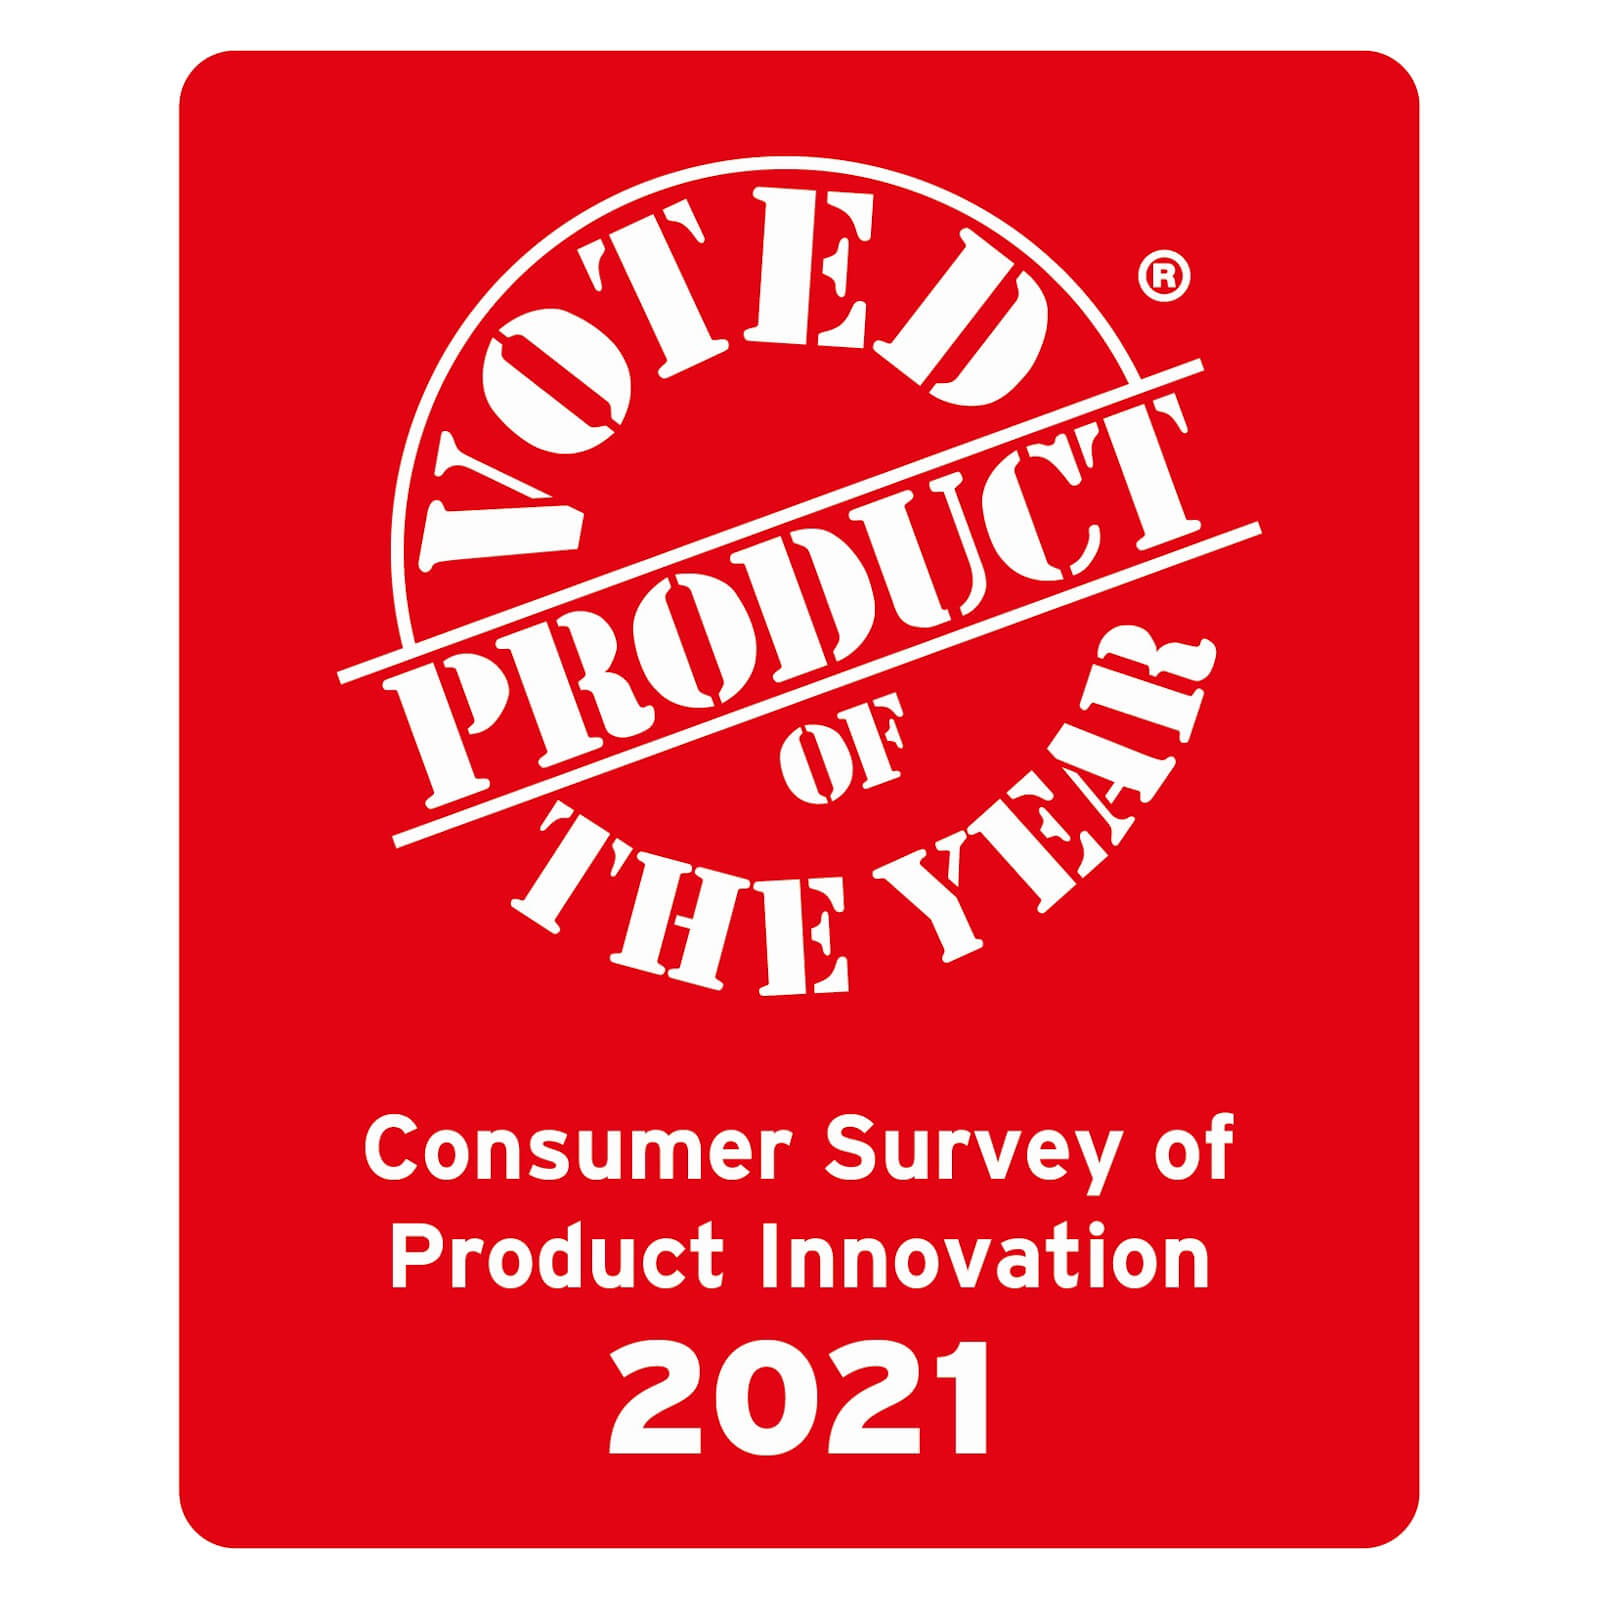 VOTED PRODUCT OF THE YEARConsumer Survey of Product Innovation2021 LOGO